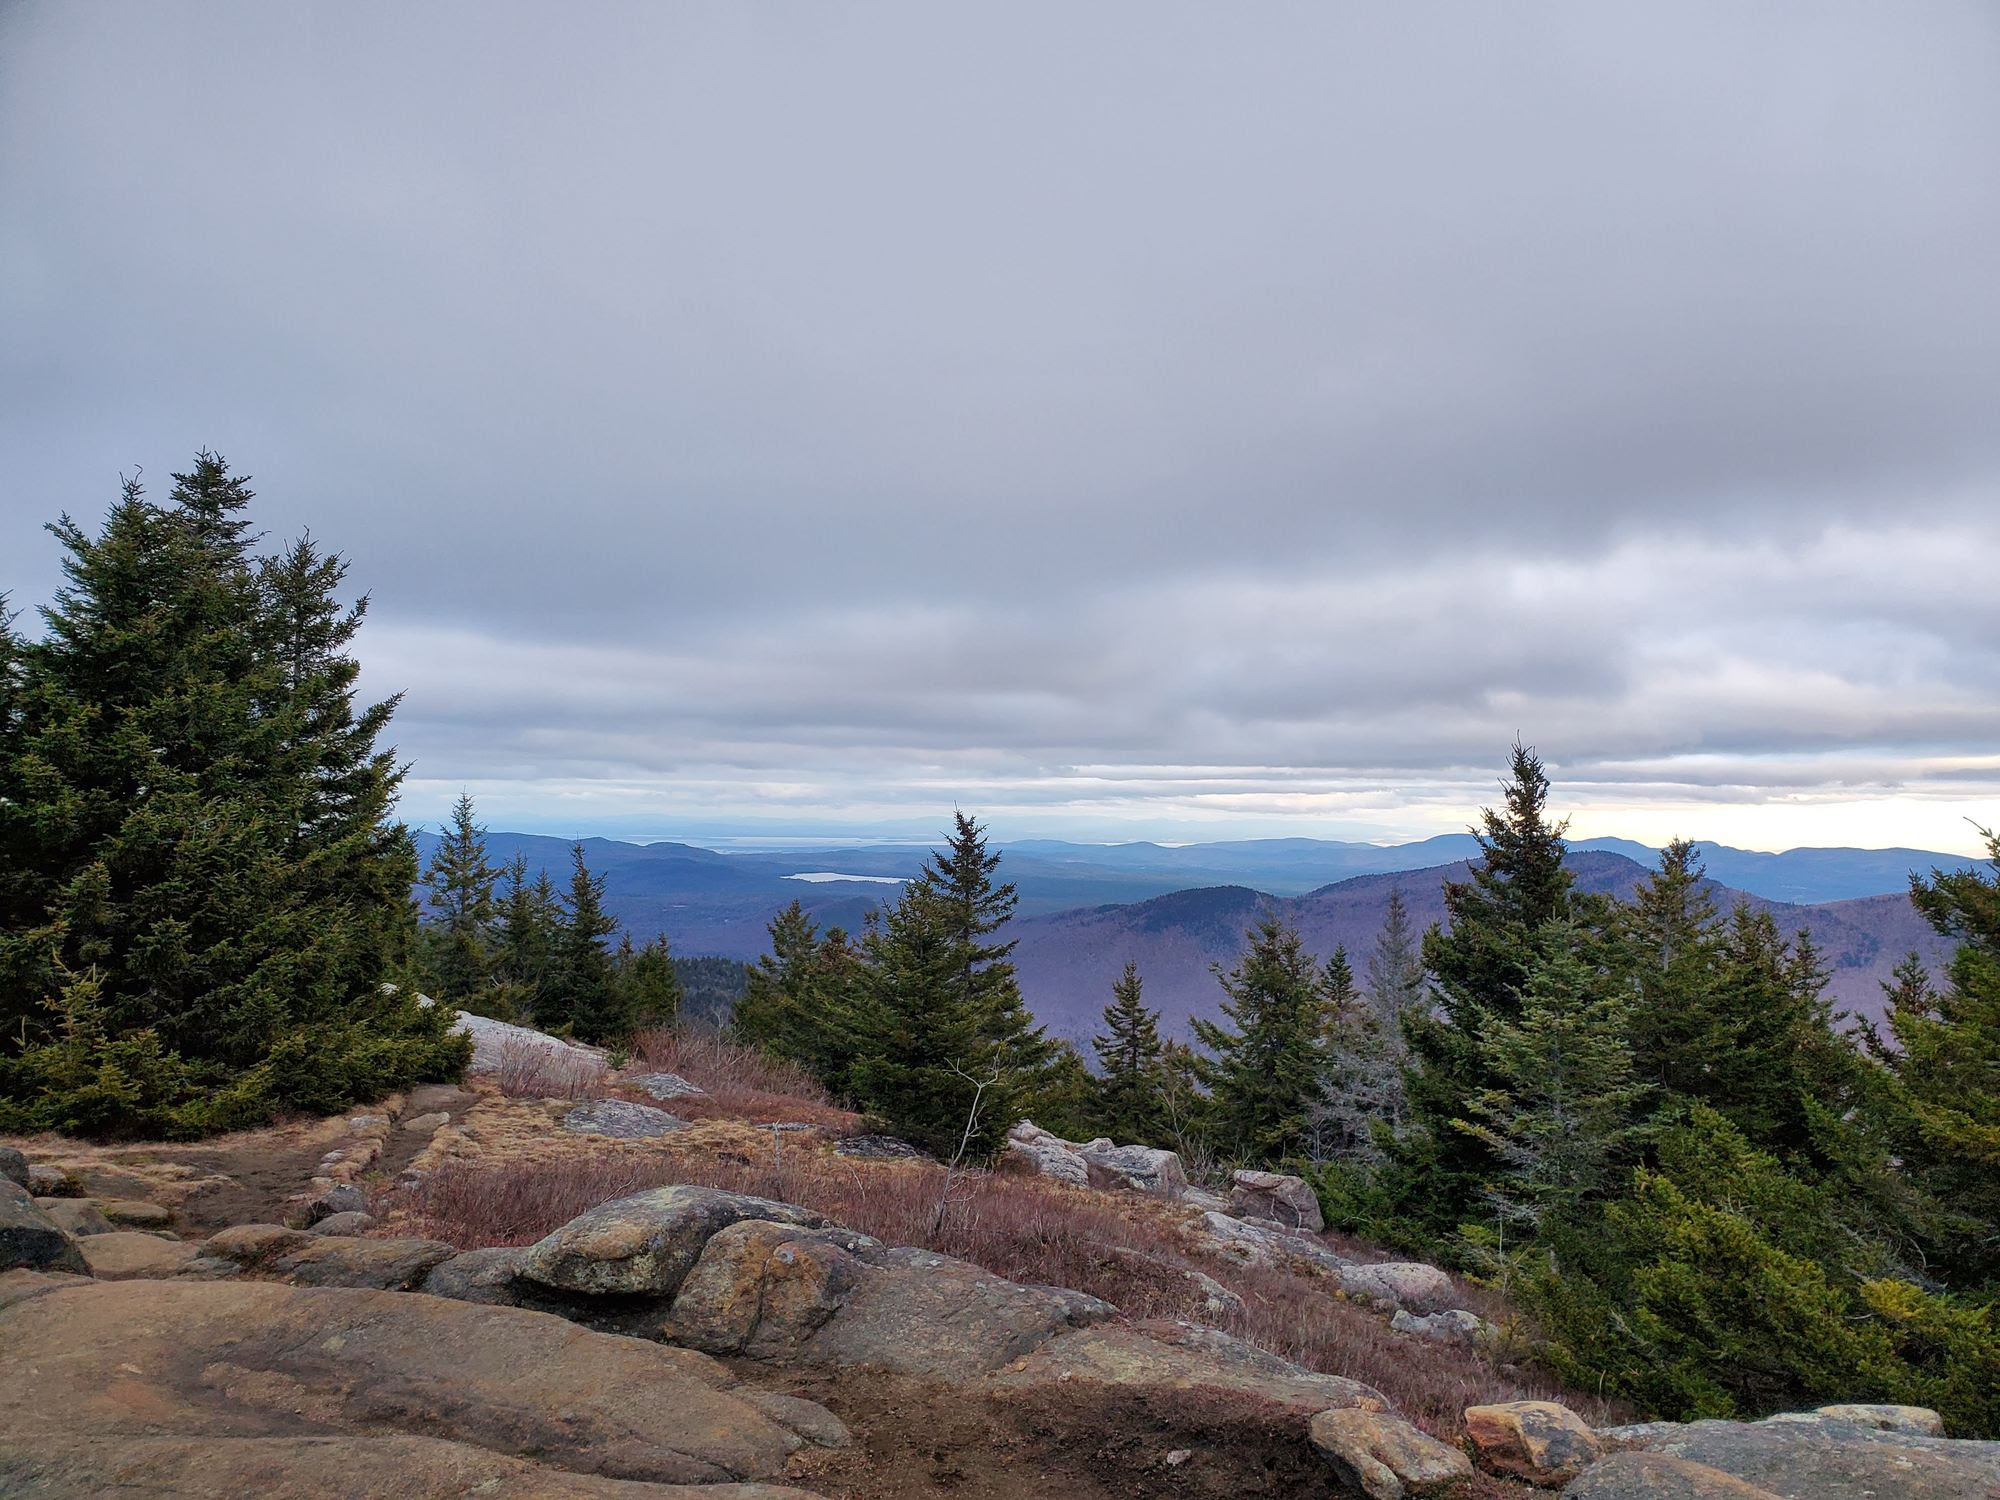 View from summit of Adirondack Mountain